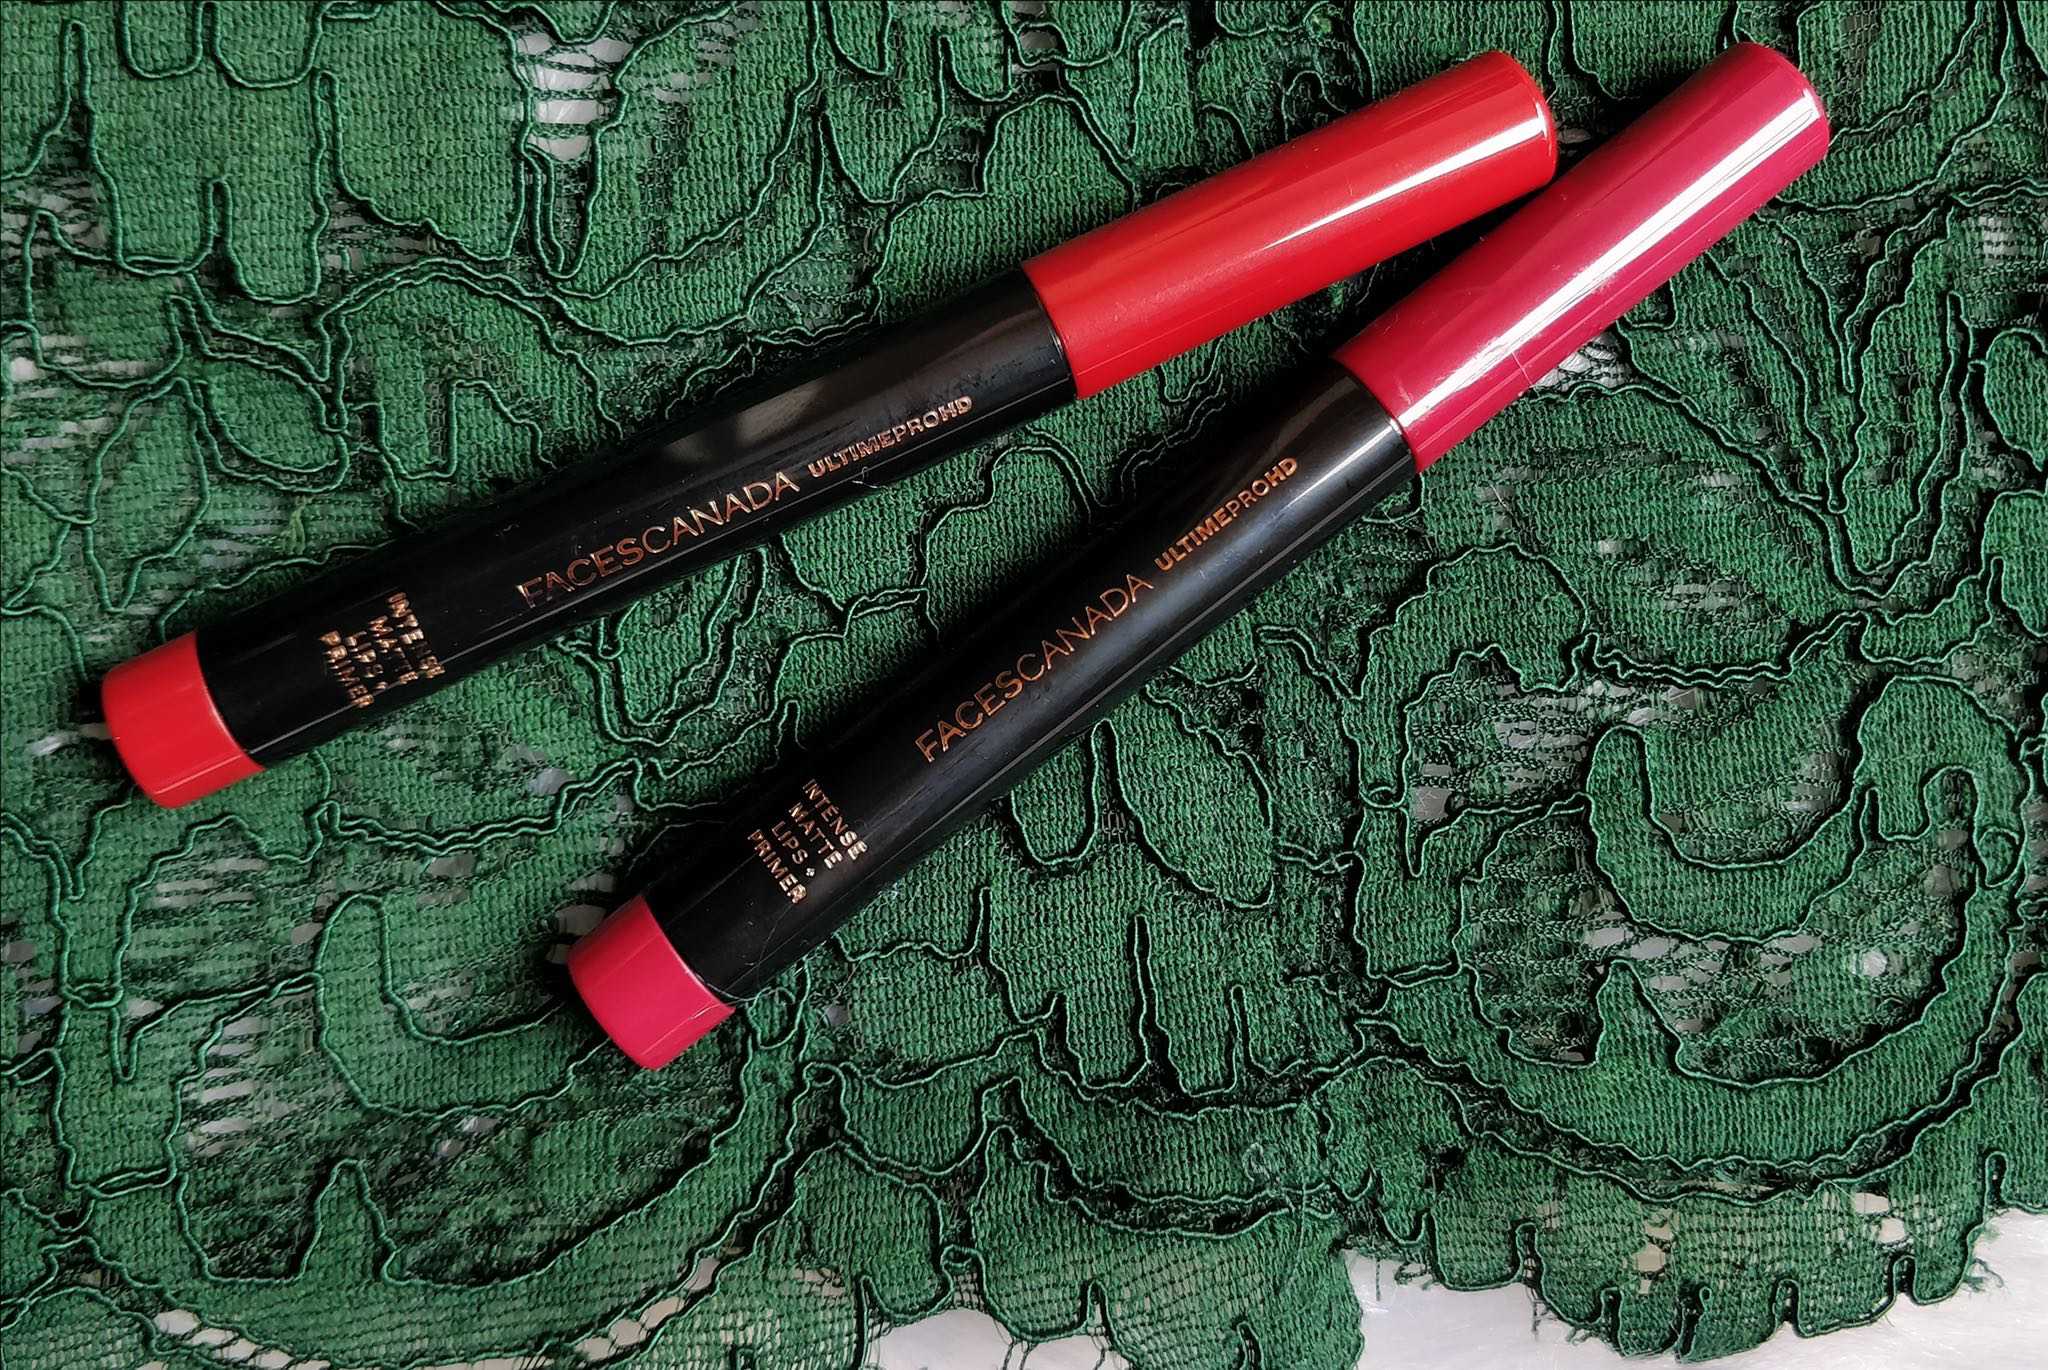 Faces Canada Ultime Pro Hd Intense Matte Lips + Primer Review,Faces Crushed Berry, Faces Mulberry Magic, Faces Lipcrayon review